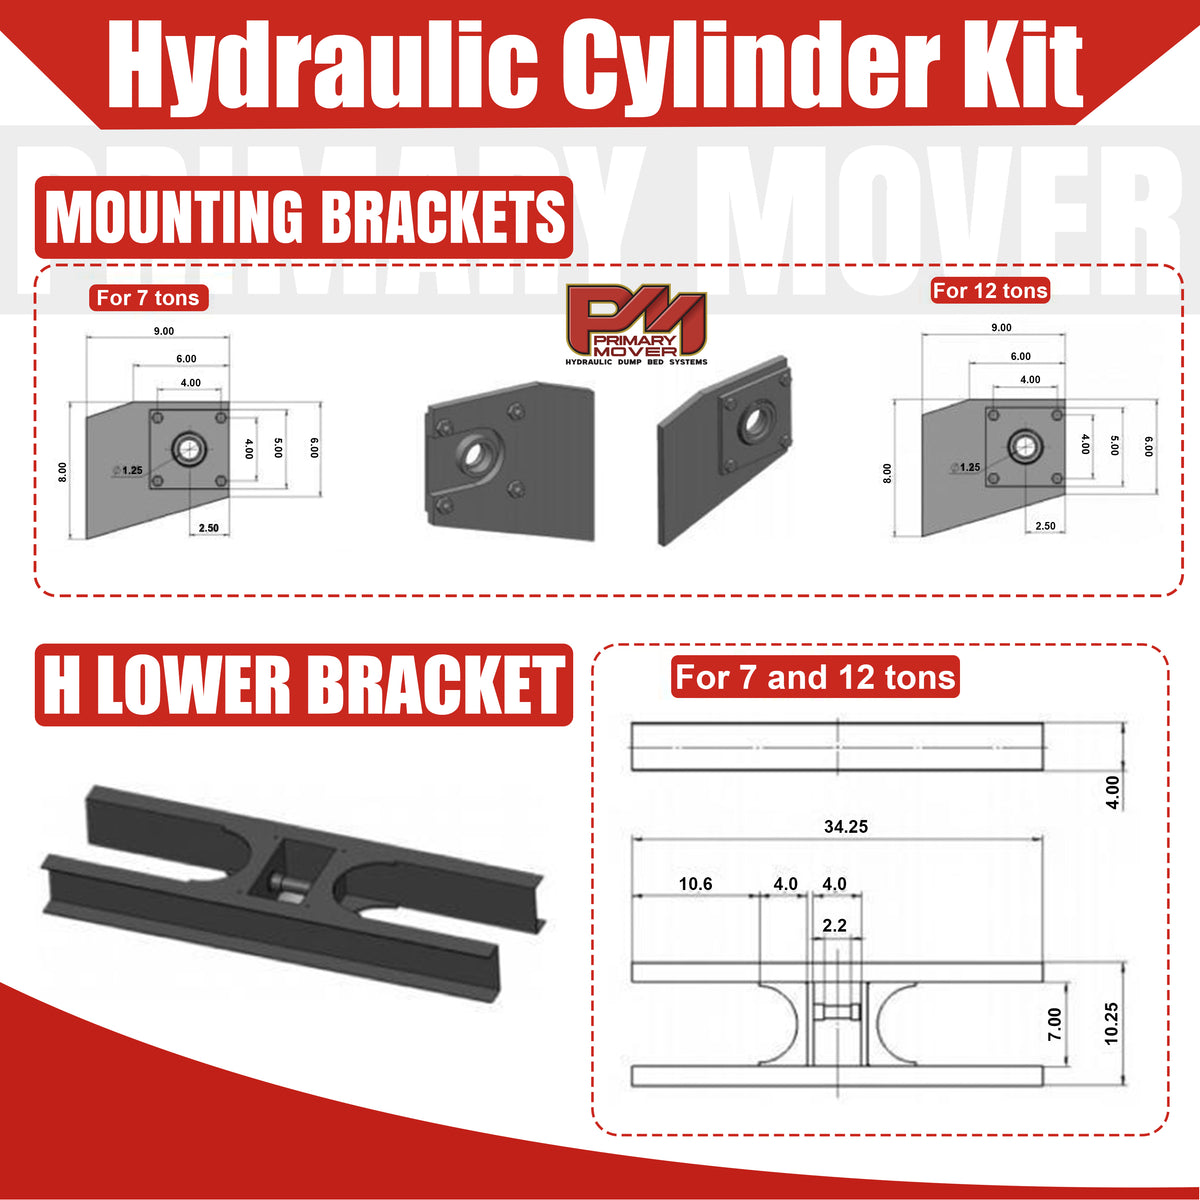 Diagram of Telescopic Dump Trailer Cylinder Kit - 20 Ton Capacity - 108 Stroke - Fits 10-14' Dump Body | EF-07-108, showing components and assembly.